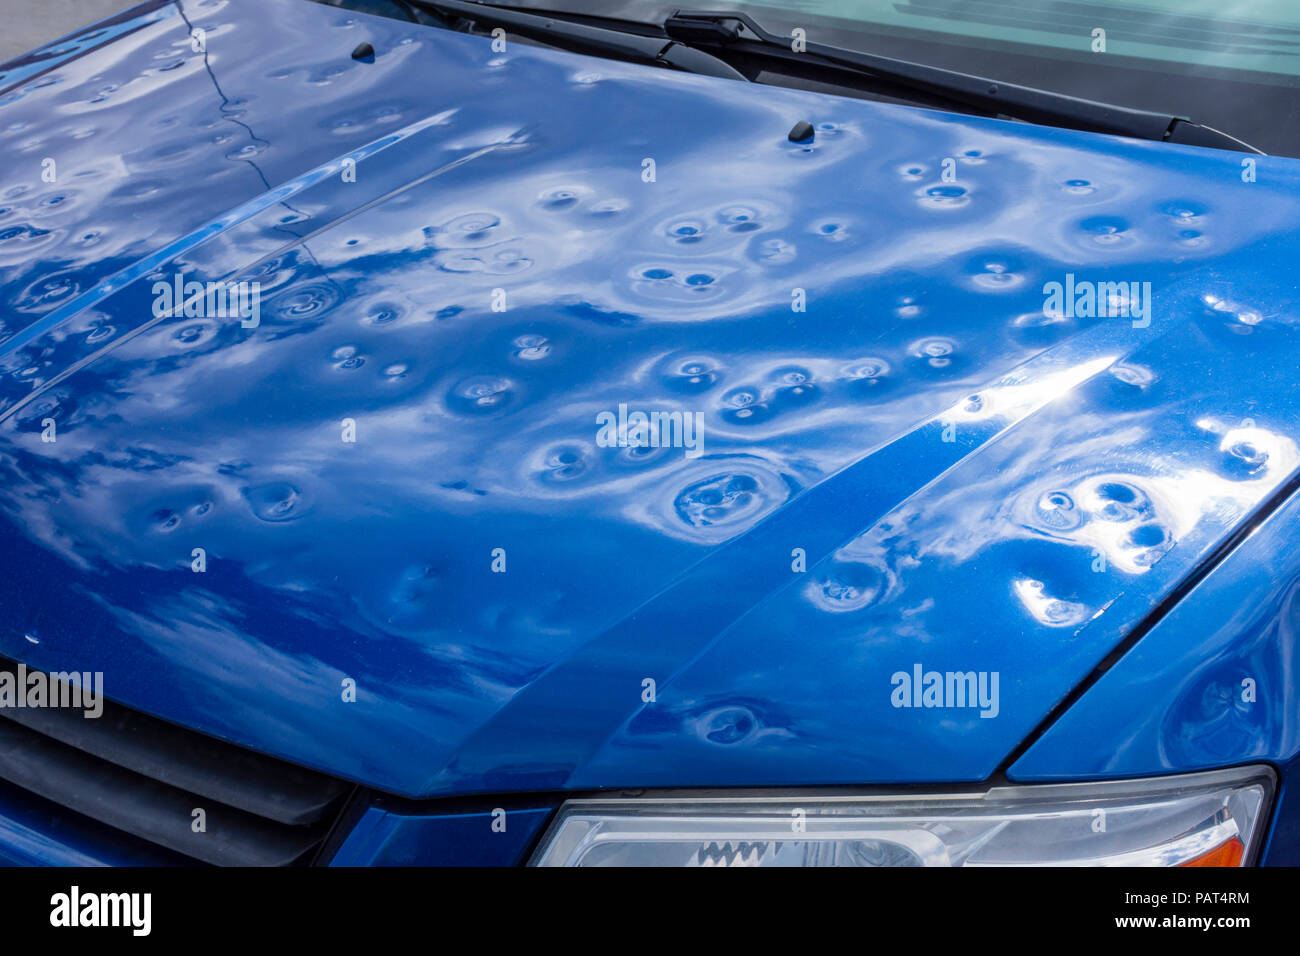 Severe hail damage to the hood of automobile, Aurora Colorado USA. The Storm occurred in July 2016. Stock Photo